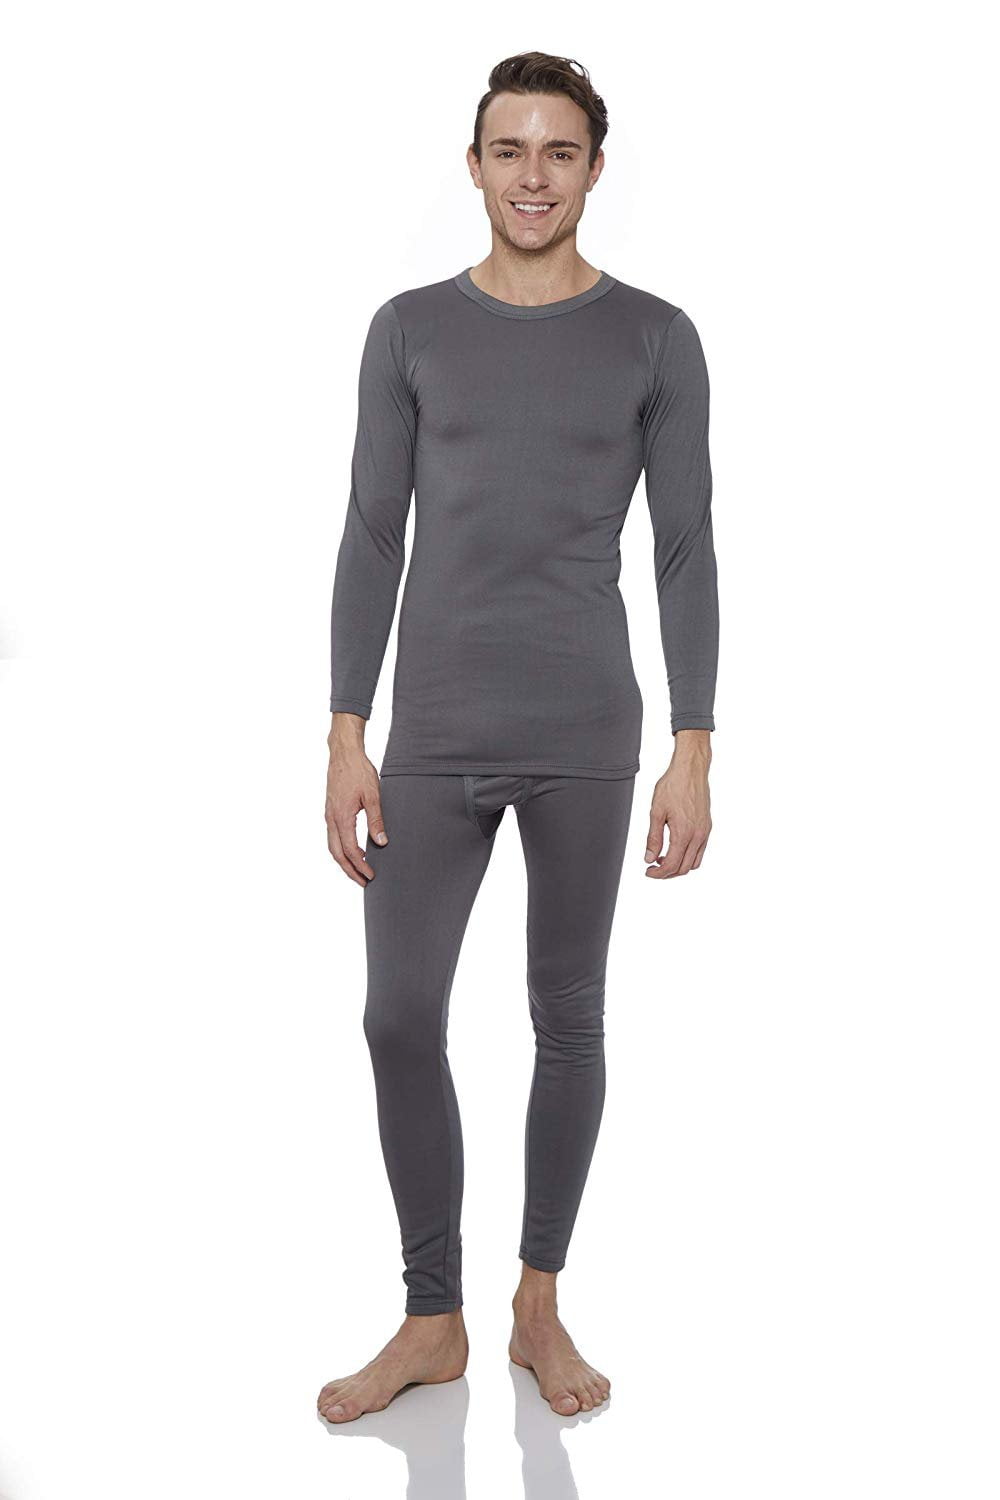 MENS THERMAL UNDERWEAR LONG JOHNS LONG SLEEVE ONE PIECE ALL IN 1 WHITE CHARCOAL